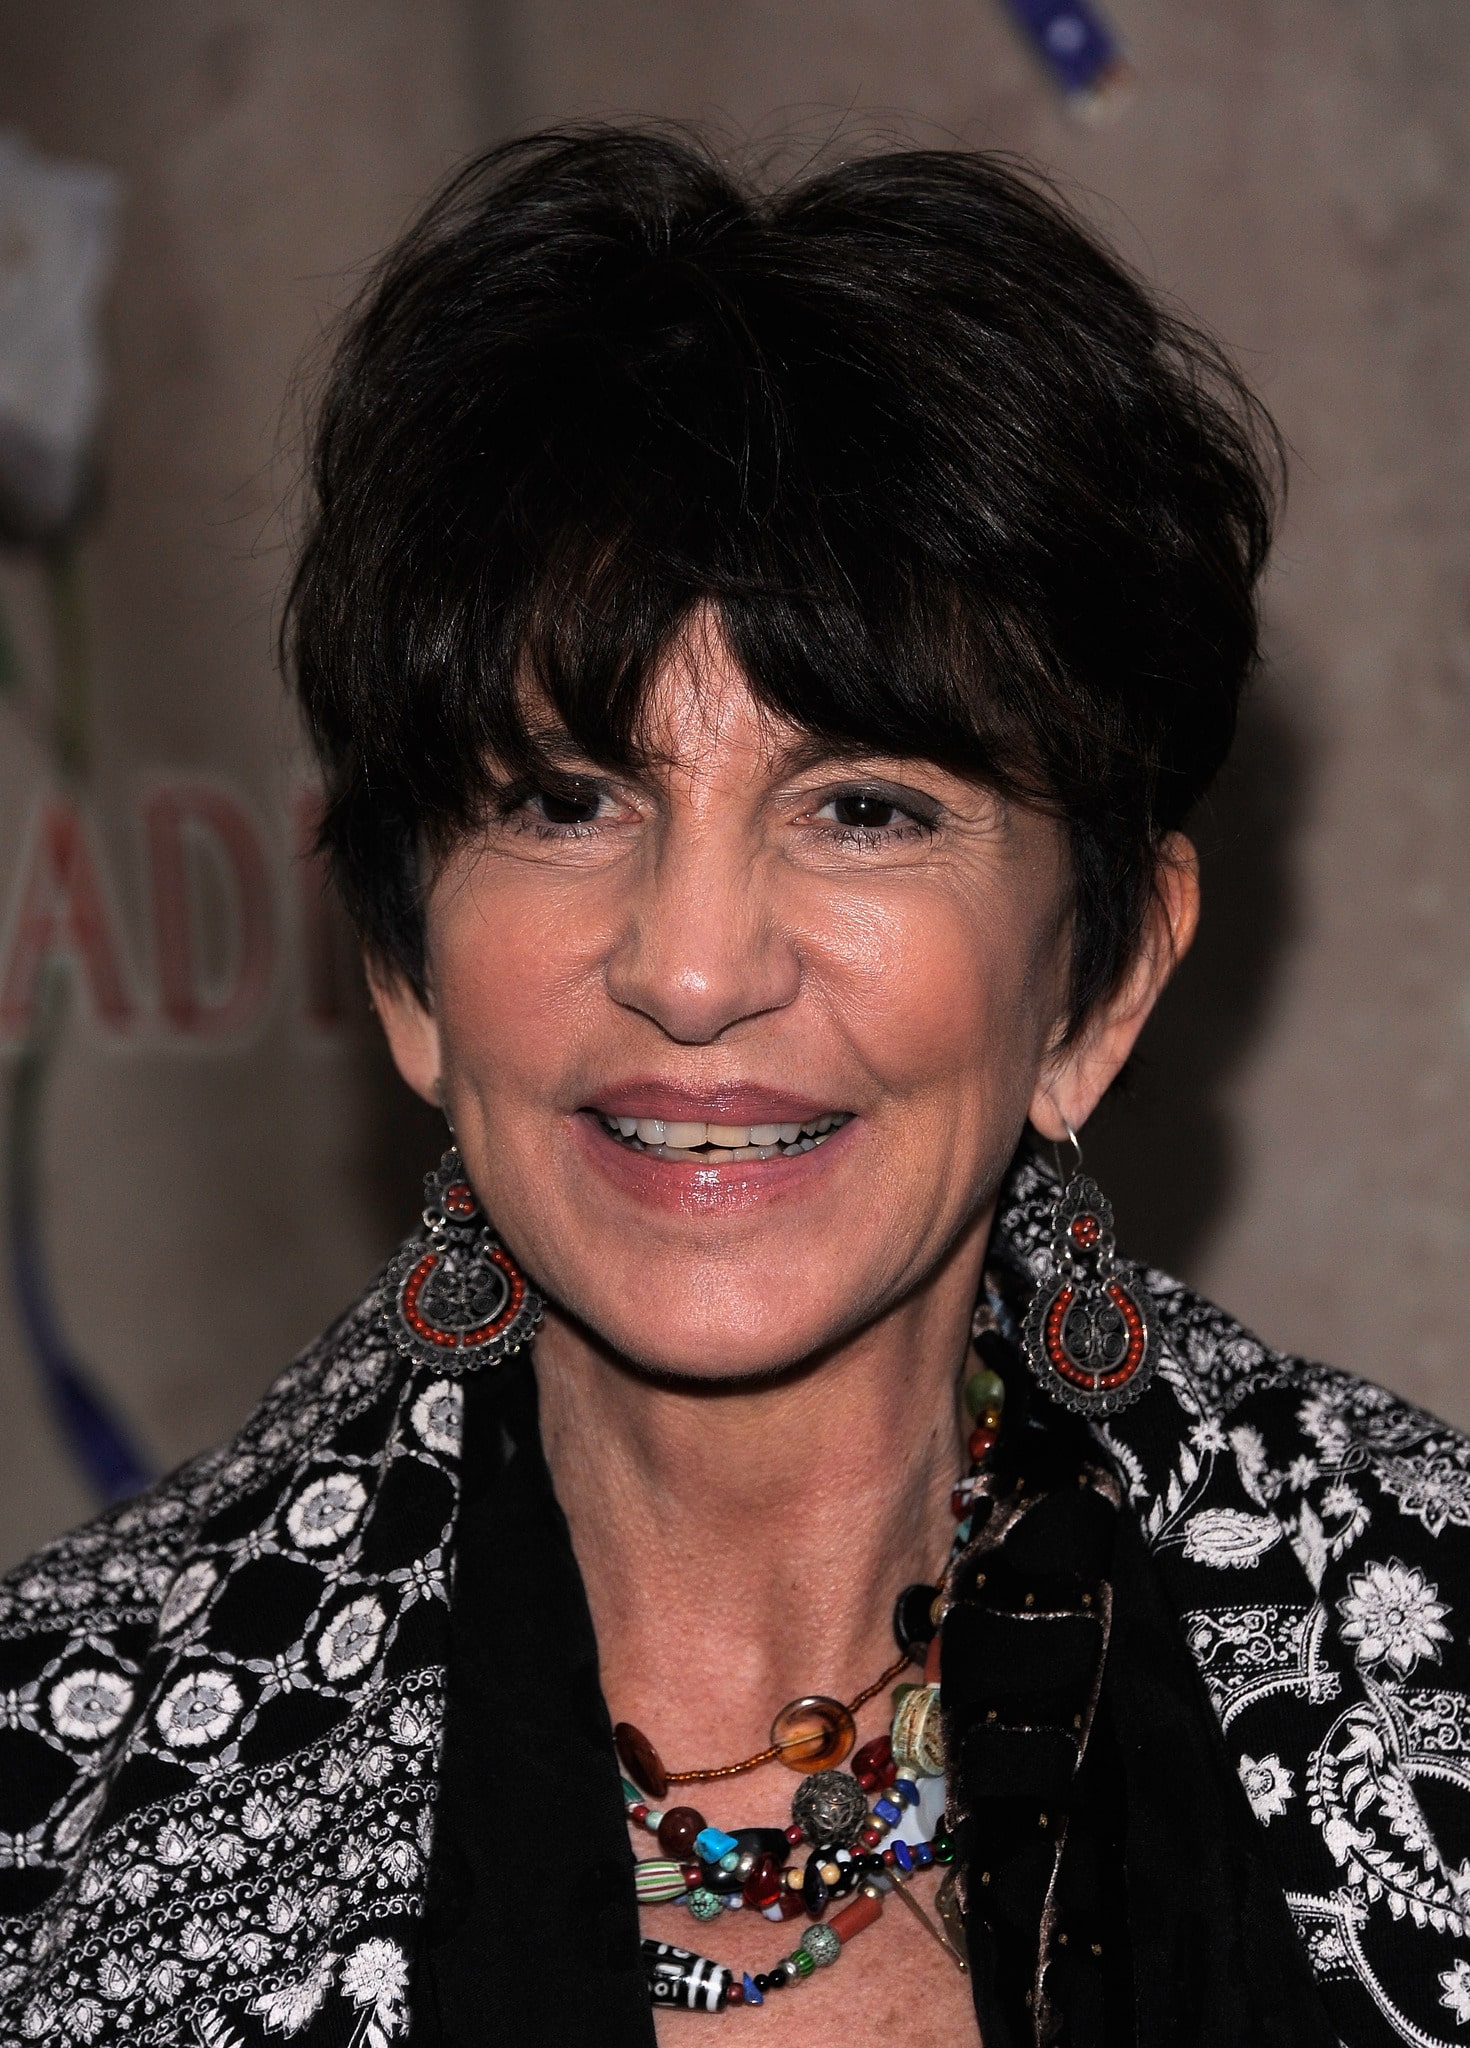 Mercedes Ruehl in a smiley face